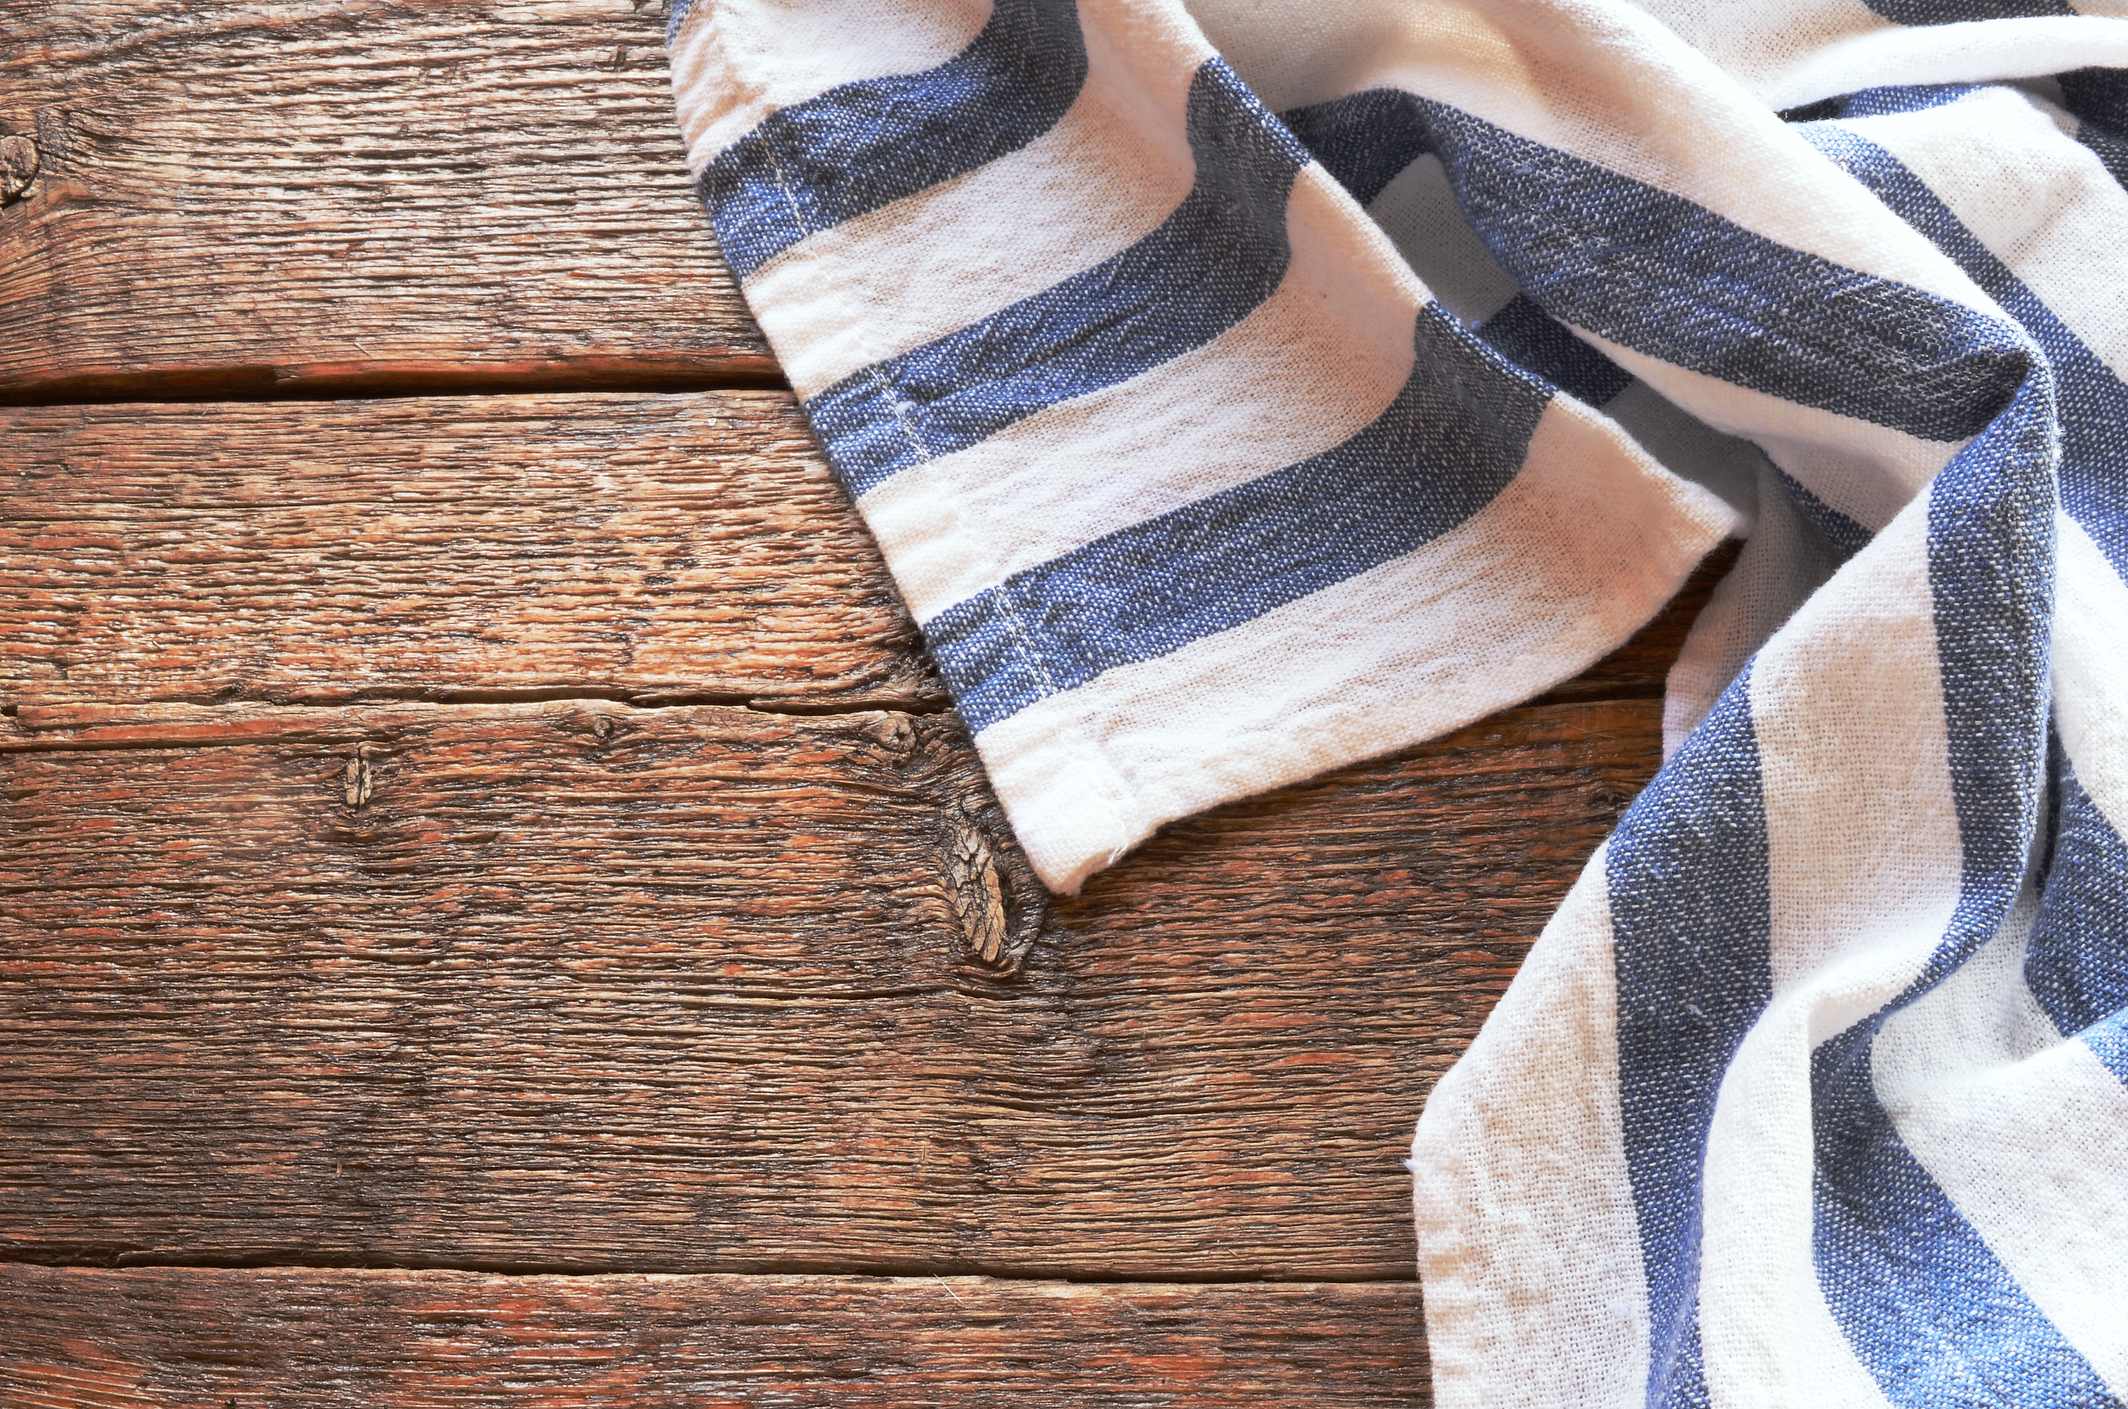 How to Kill the Bacteria in Your Dishcloths